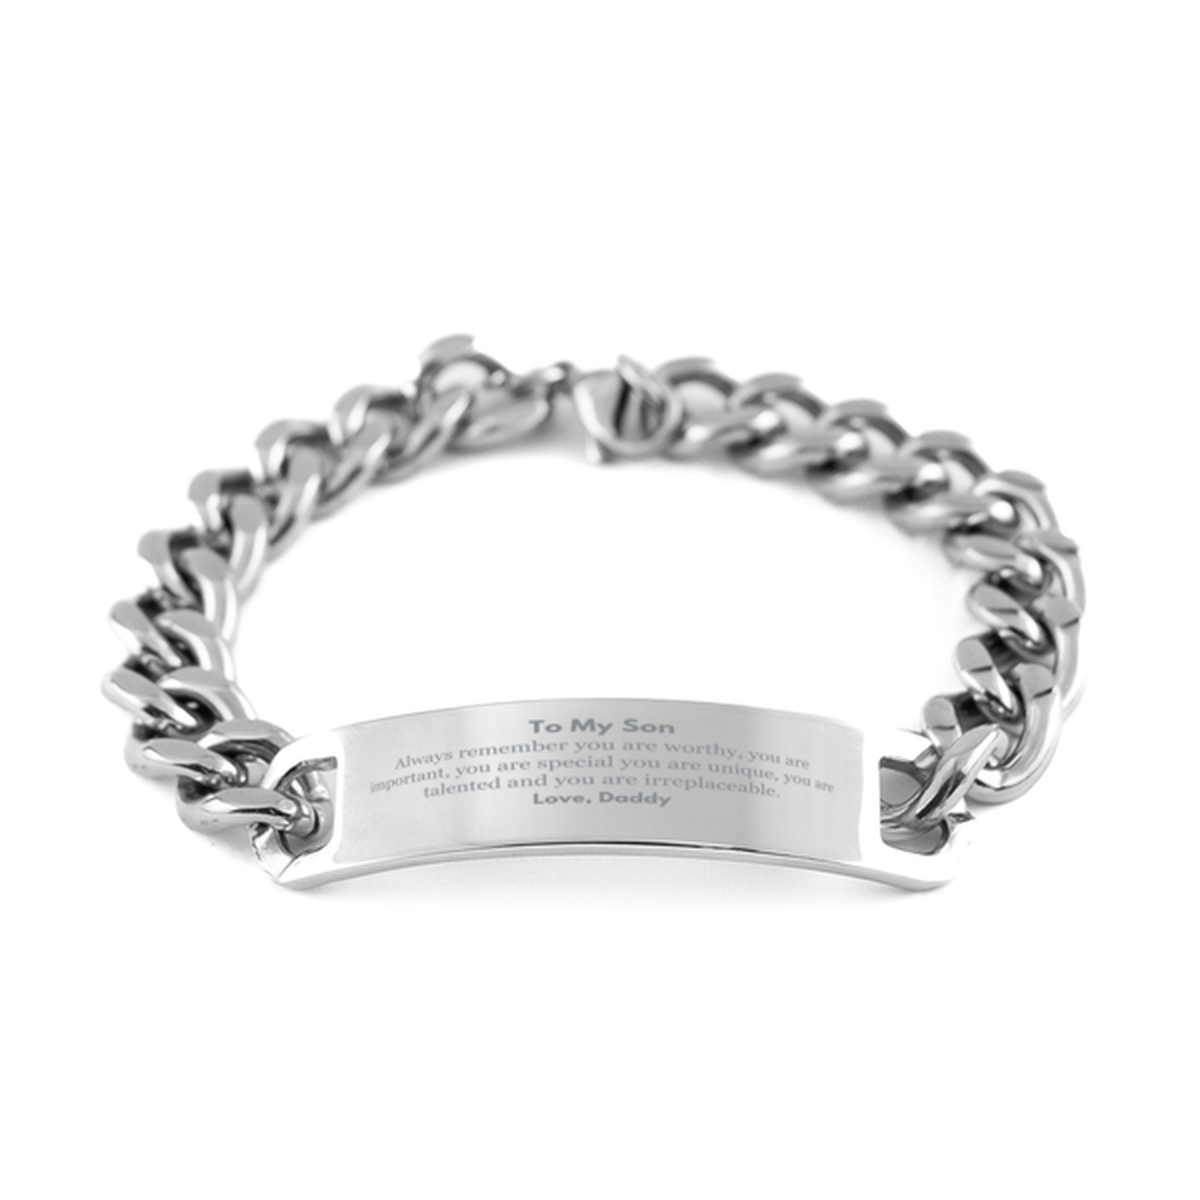 Son Birthday Gifts from Daddy, Inspirational Cuban Chain Stainless Steel Bracelet for Son Christmas Graduation Gifts for Son Always remember you are worthy, you are important. Love, Daddy